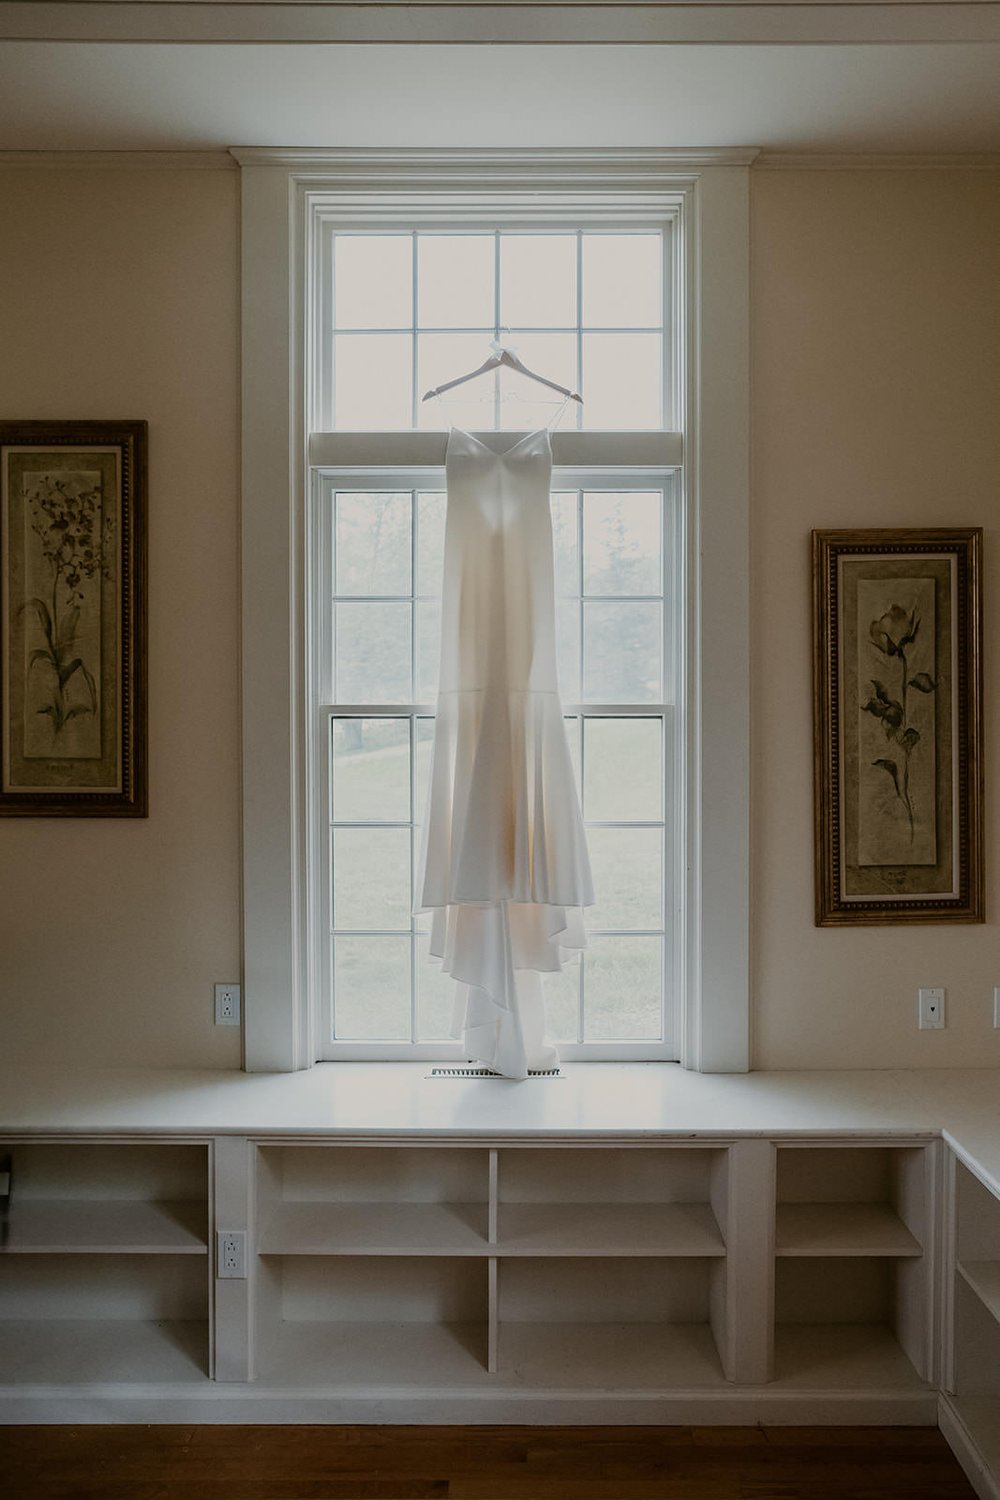 Bridal gown hanging infront of window as it gleams with beauty.